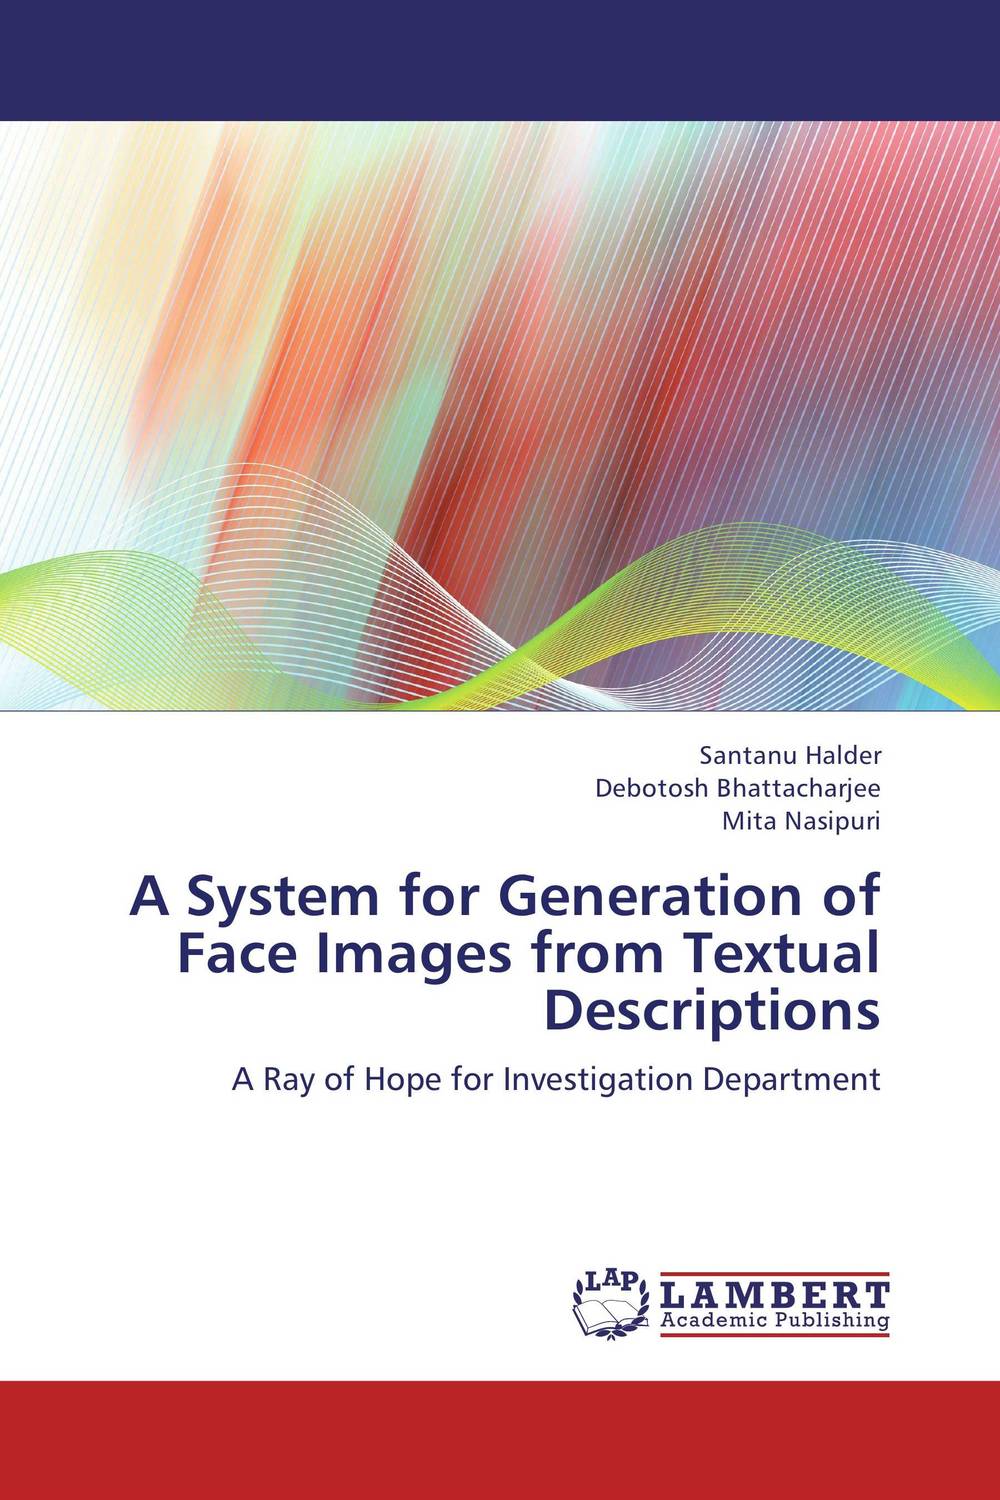 A System for Generation of Face Images from Textual Descriptions